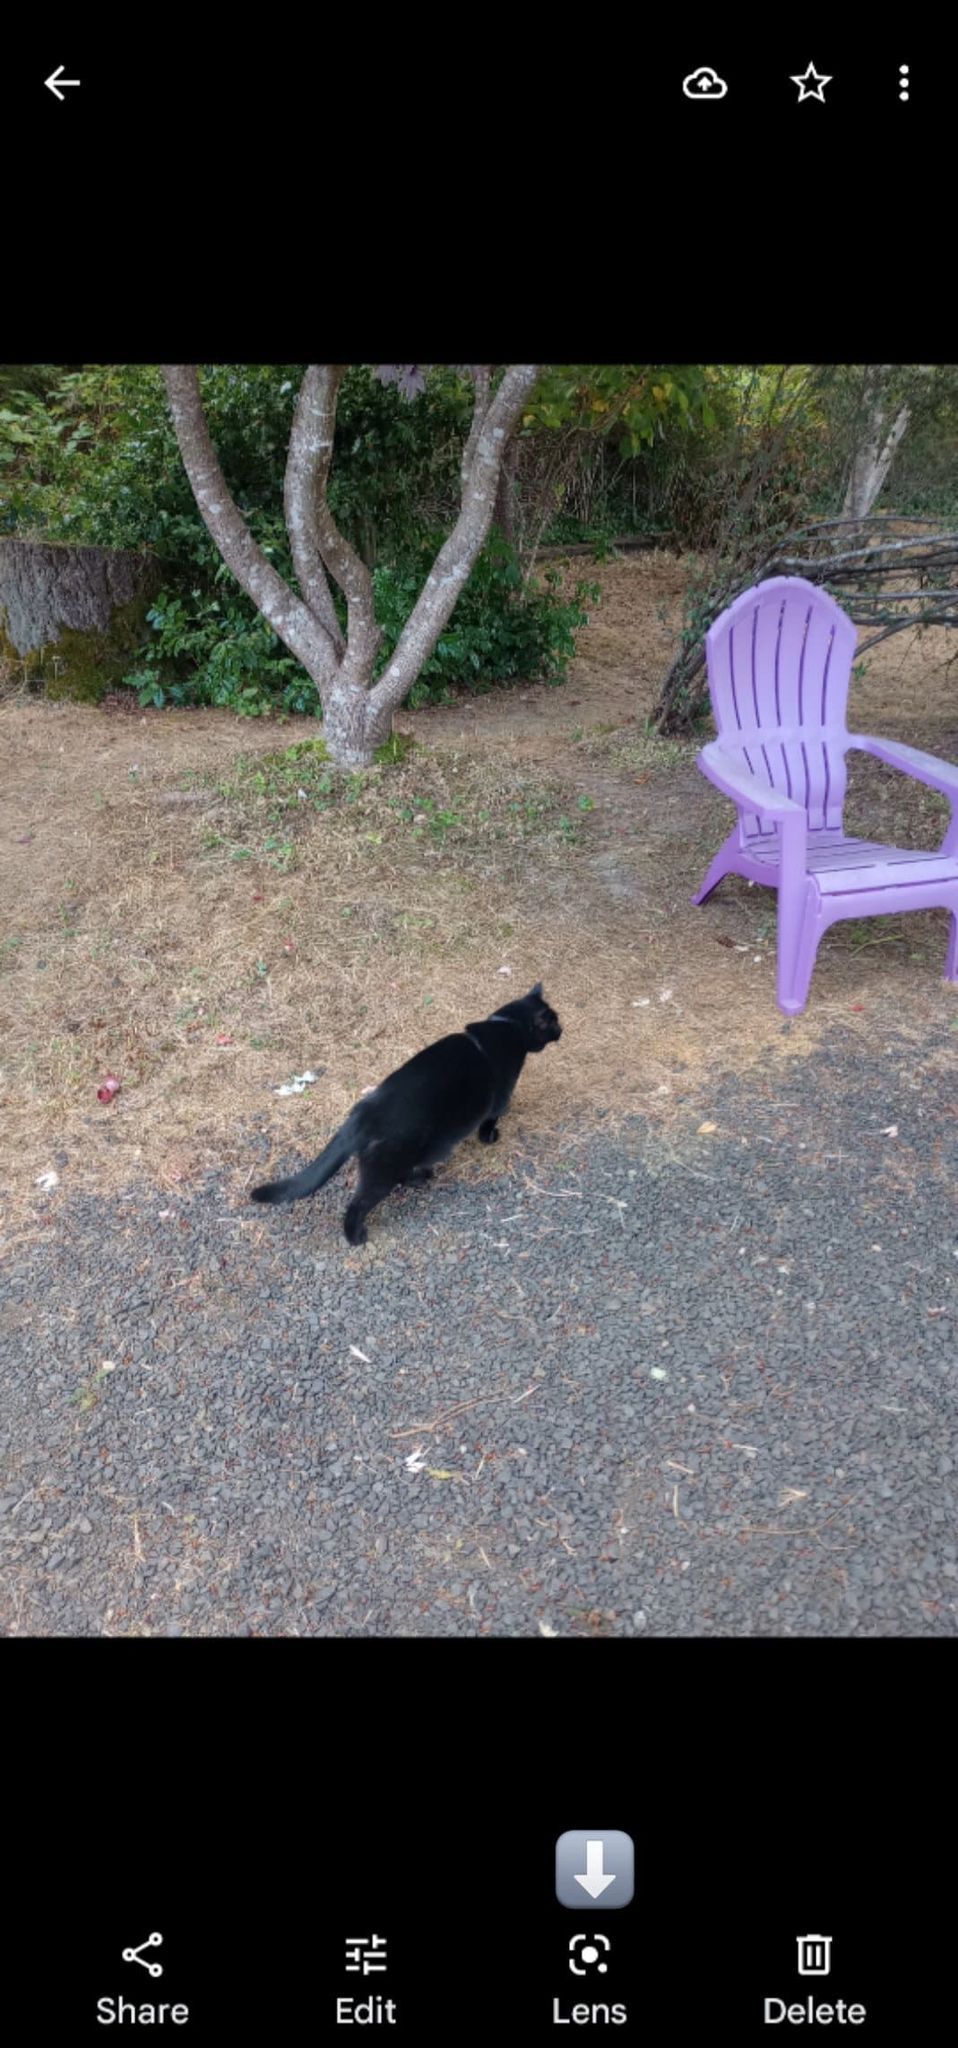 Image shows a photo of a black cat open in google photos with an arrow pointing to the lens icon.